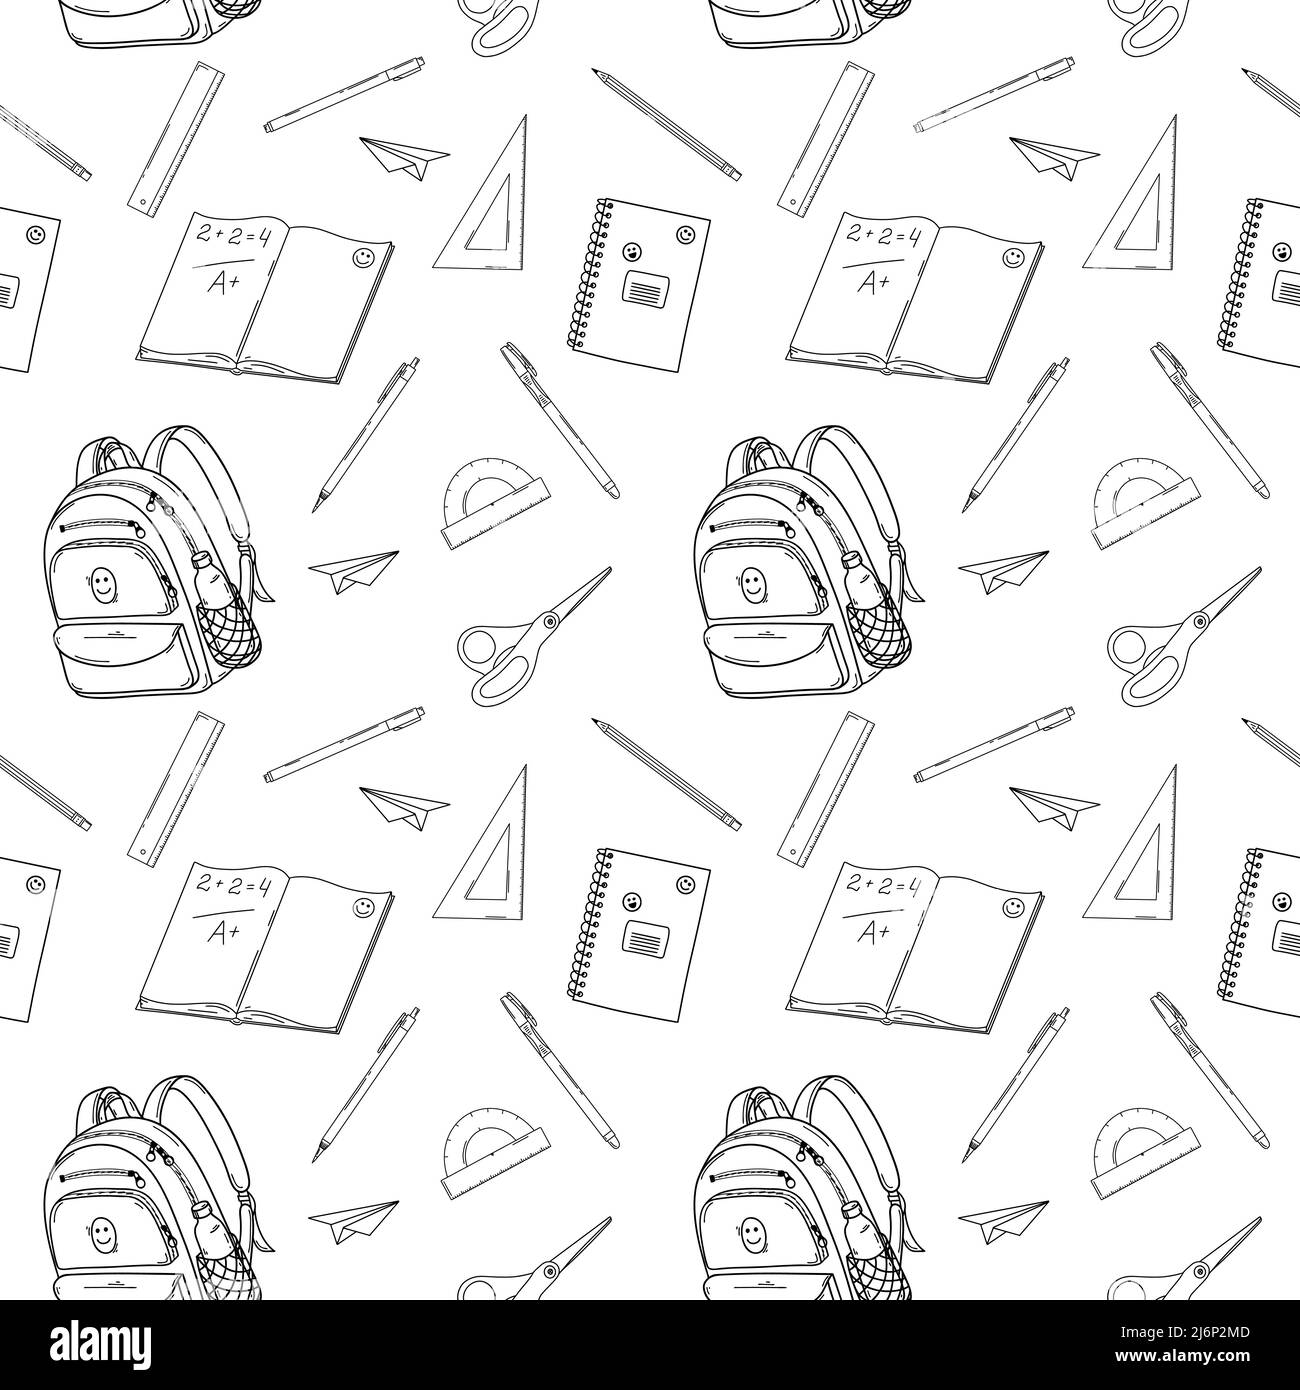 Seamless pattern on the theme of school, education, and training. Simple Doodle-style elements are hand-drawn and isolated on white.Laptop, backpack, Stock Vector